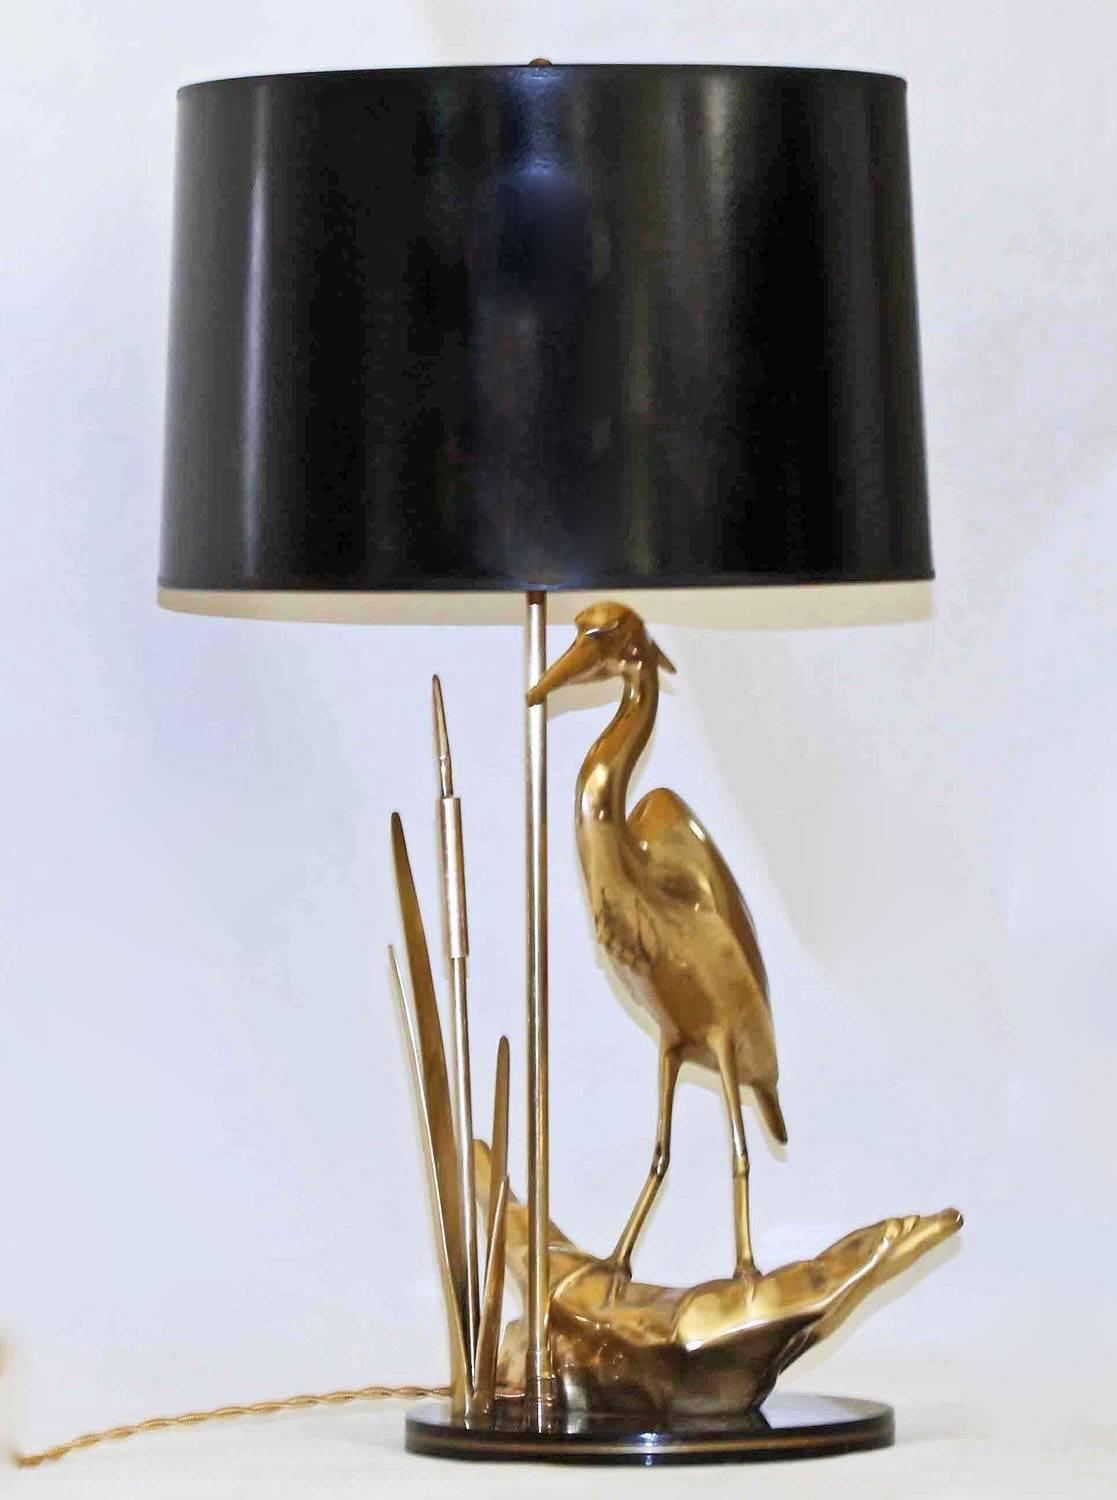 Solid brass heron table lamp resting on black lacquered base. Uses 1 - 60 watt max 